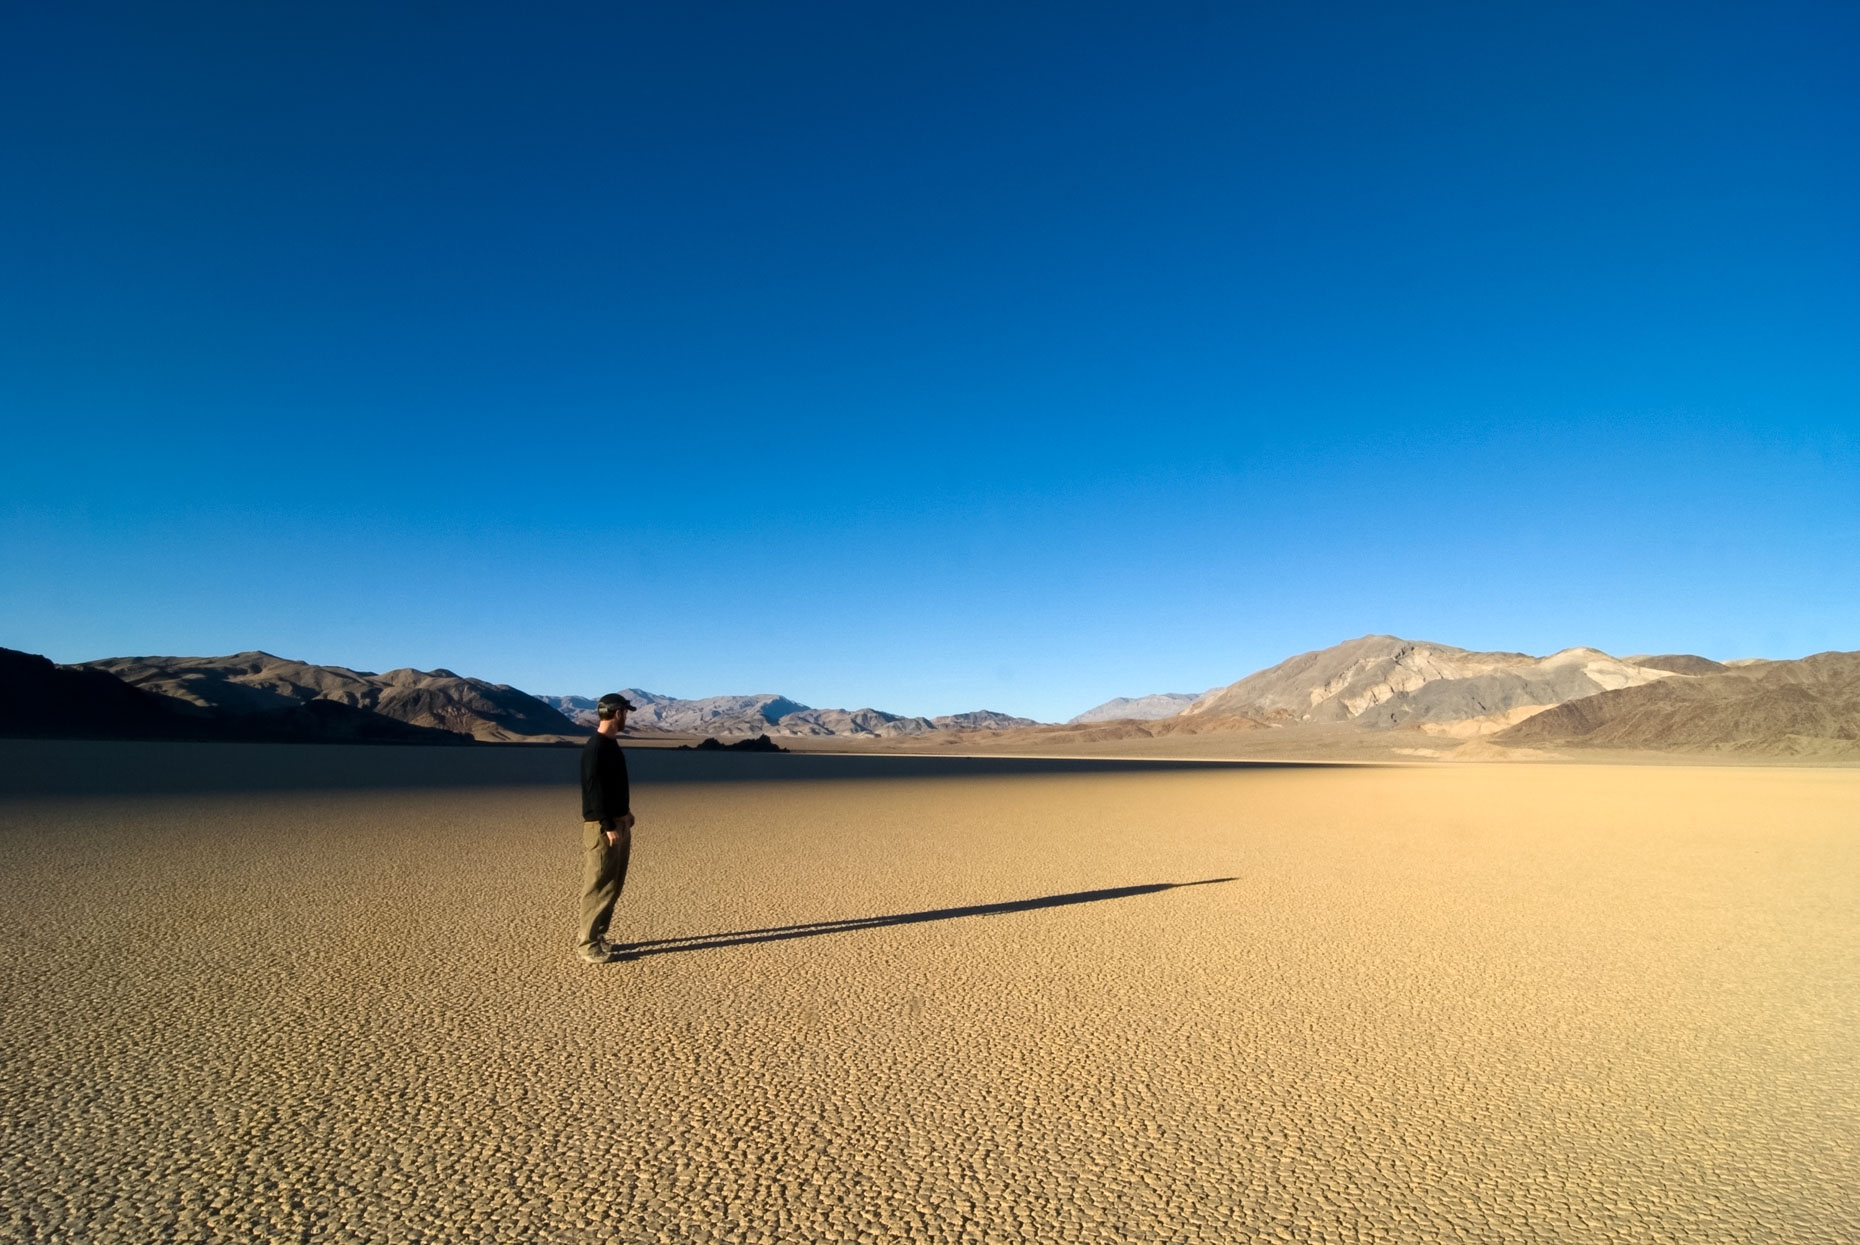 Exploring The Racetrack - Death Valley National Park, California